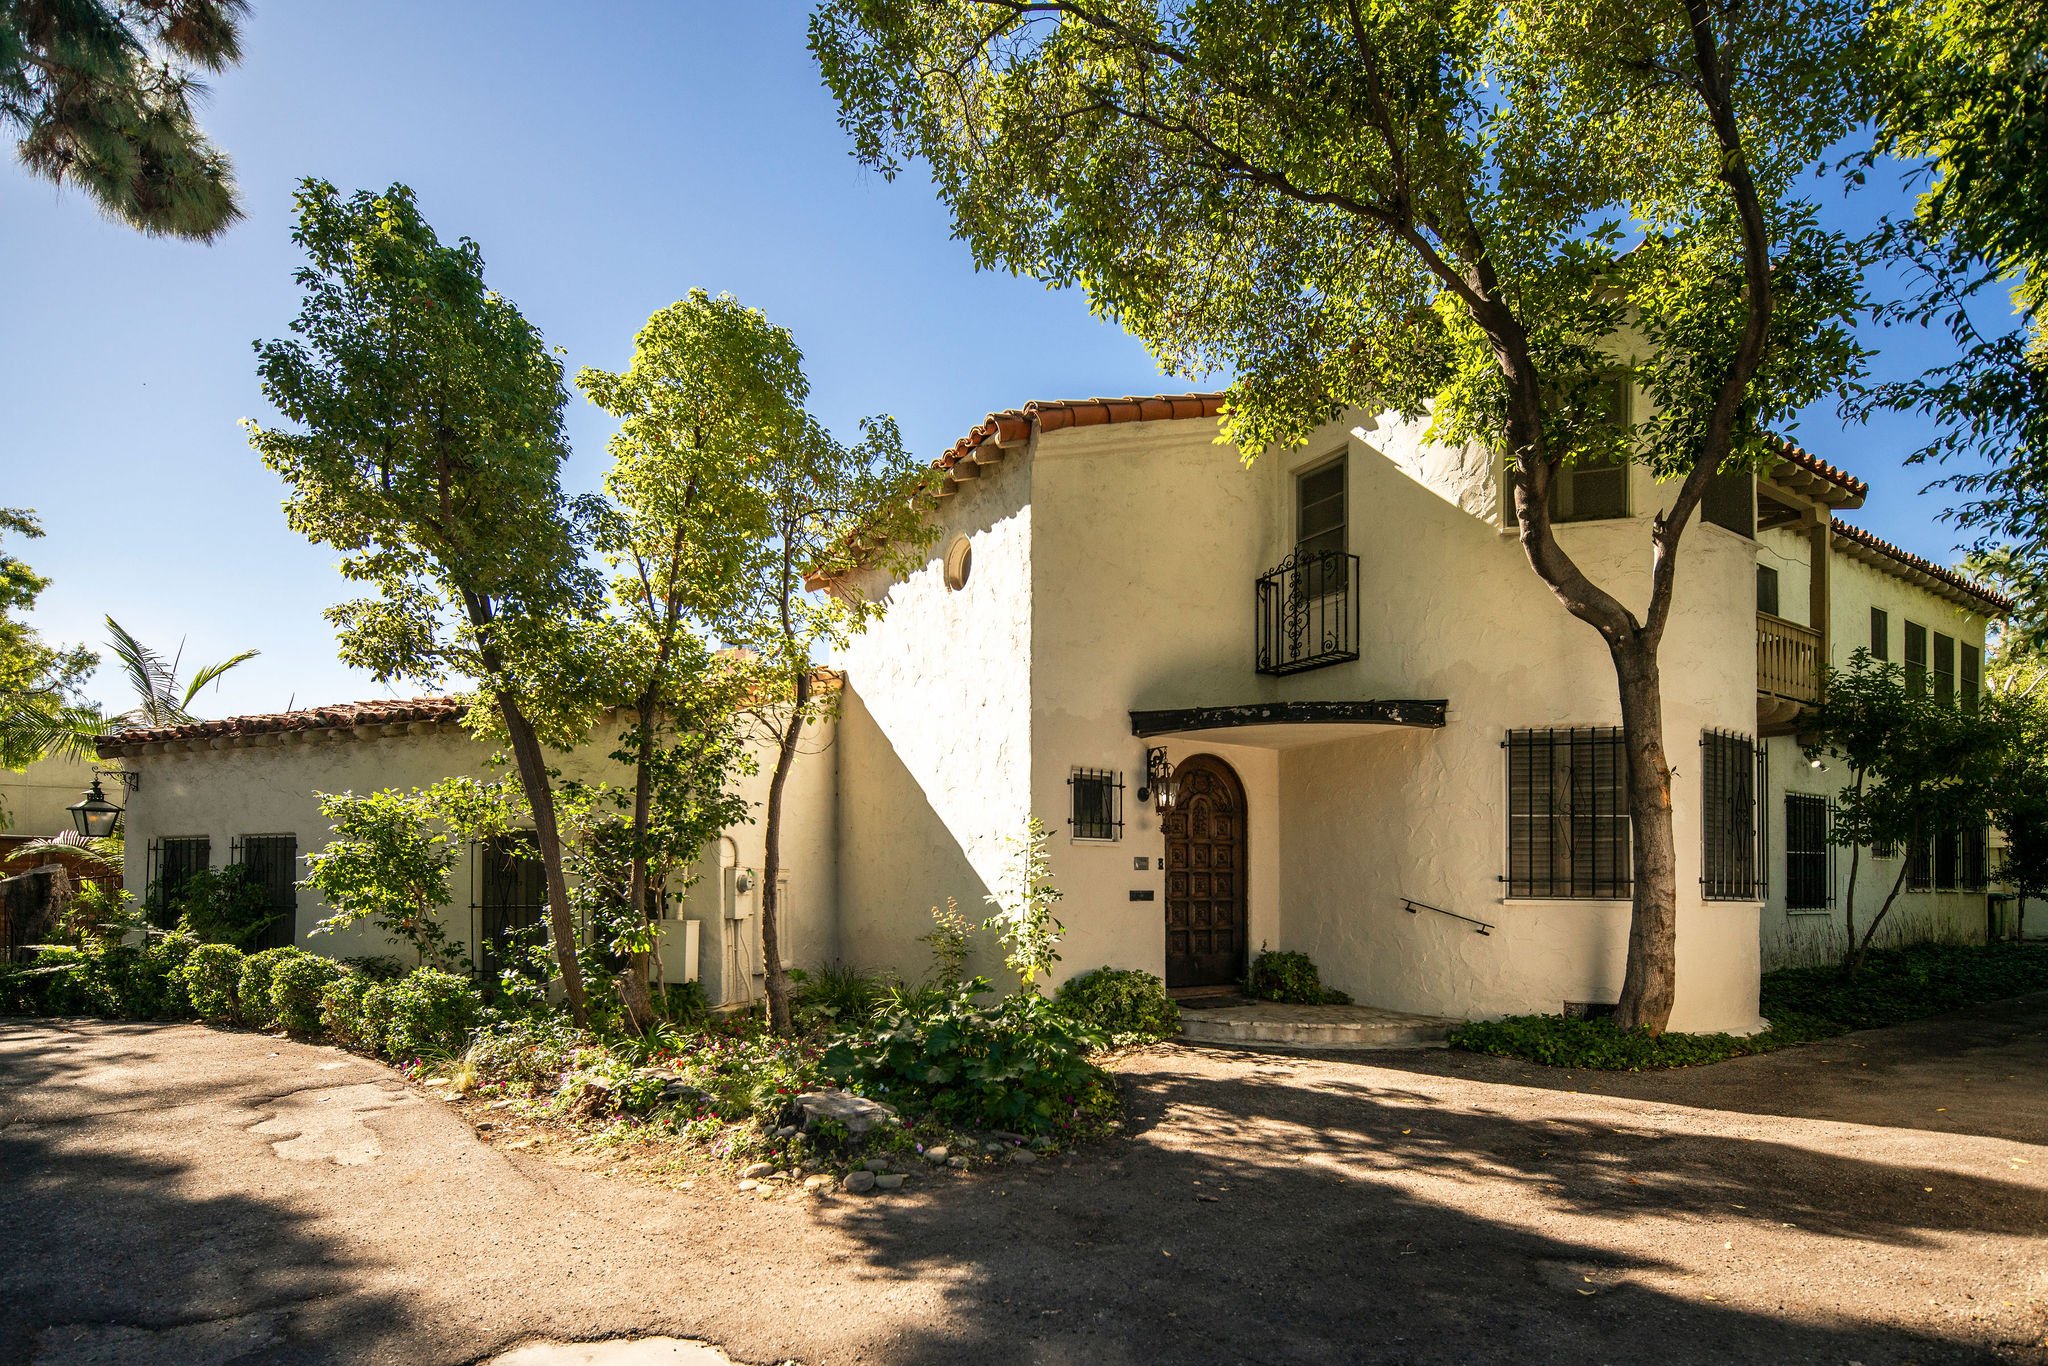 1023 Benedict Canyon Drive, Beverly Hills Sold - $4,162,312